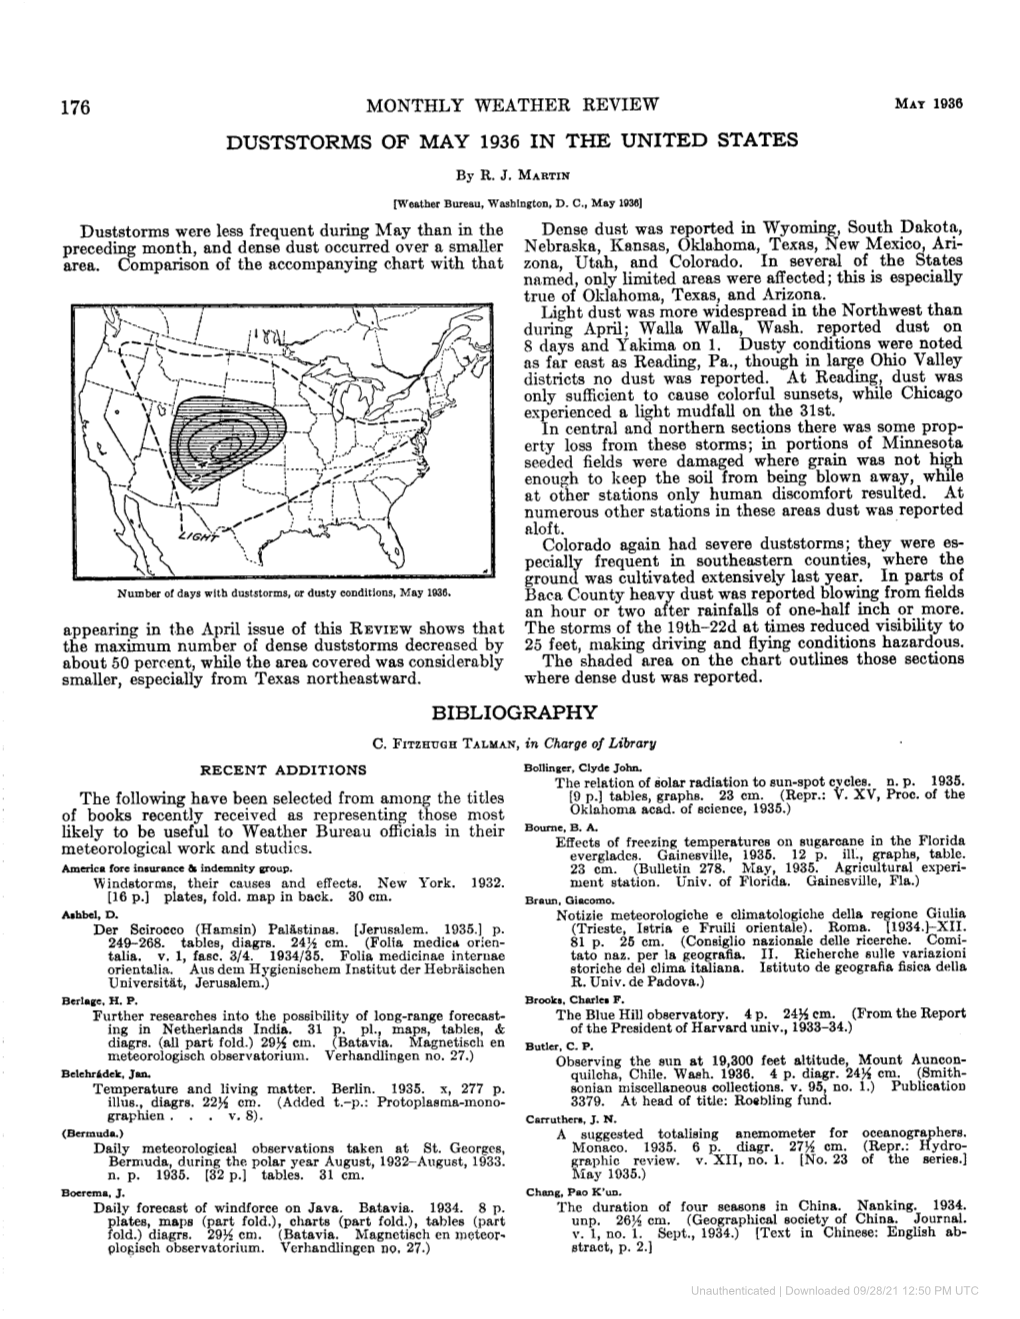 Duststorms of May 1936 in the United States Bibliography